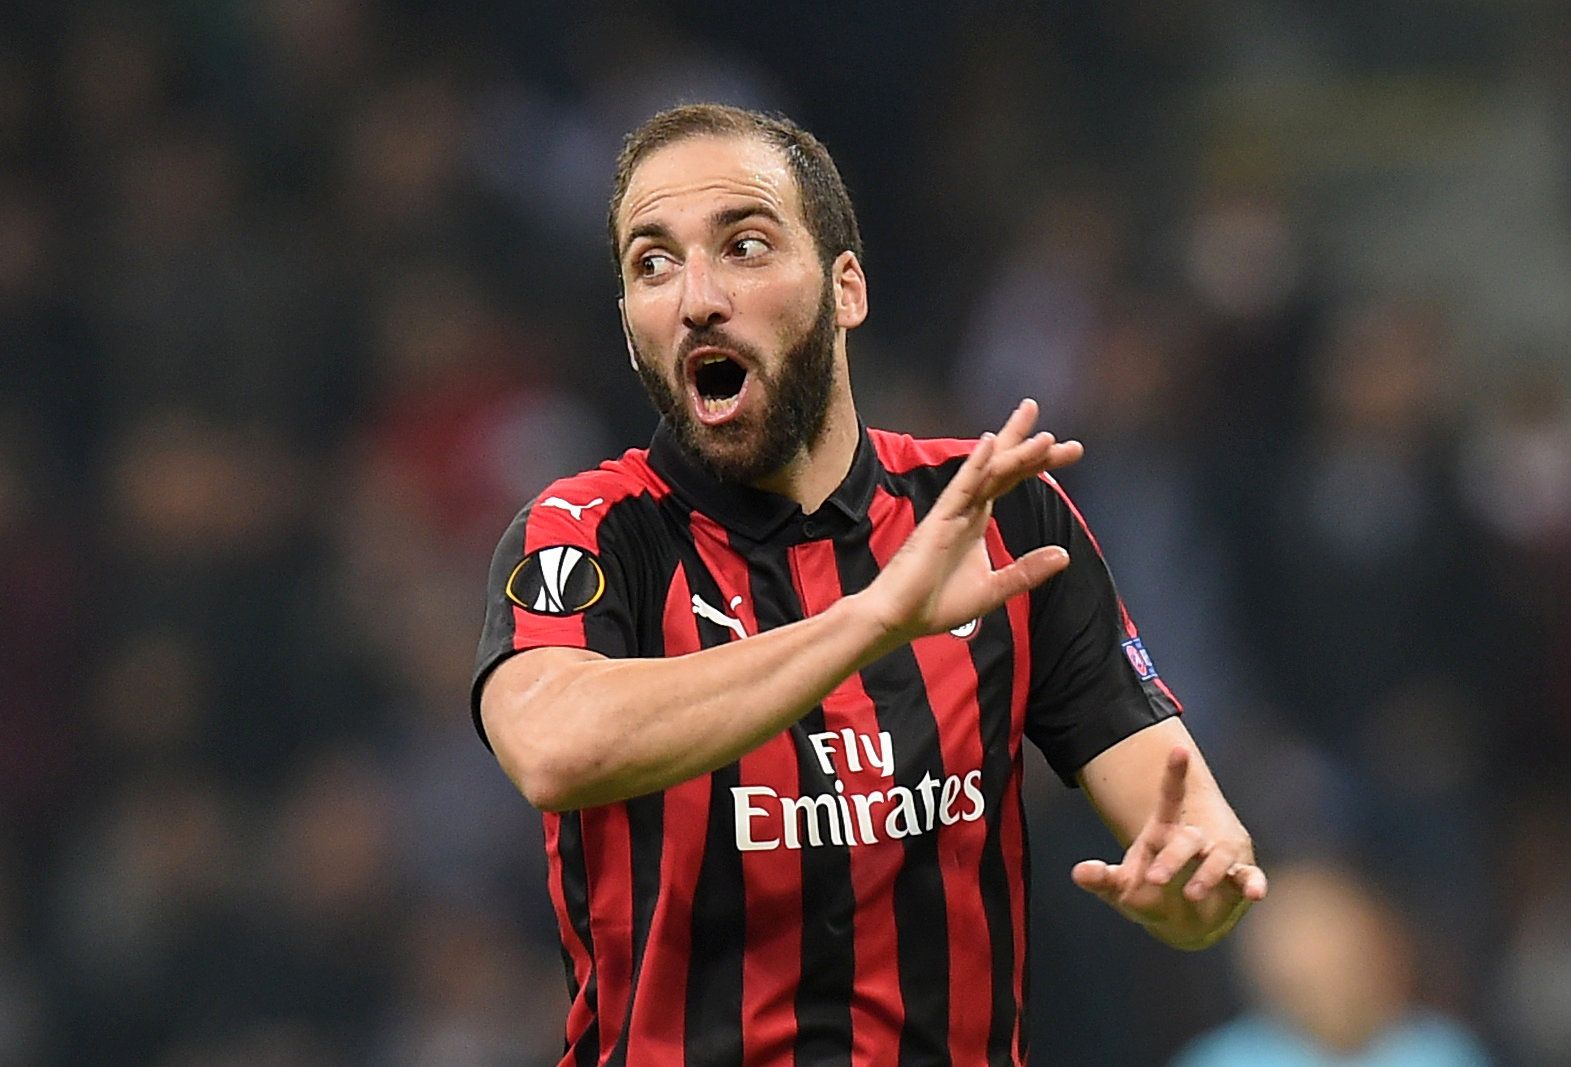 Soccer Football - Europa League - Group Stage - Group F - AC Milan v Real Betis - San Siro, Milan, Italy - October 25, 2018  AC Milan's Gonzalo Higuain reacts       REUTERS/Daniele Mascolo